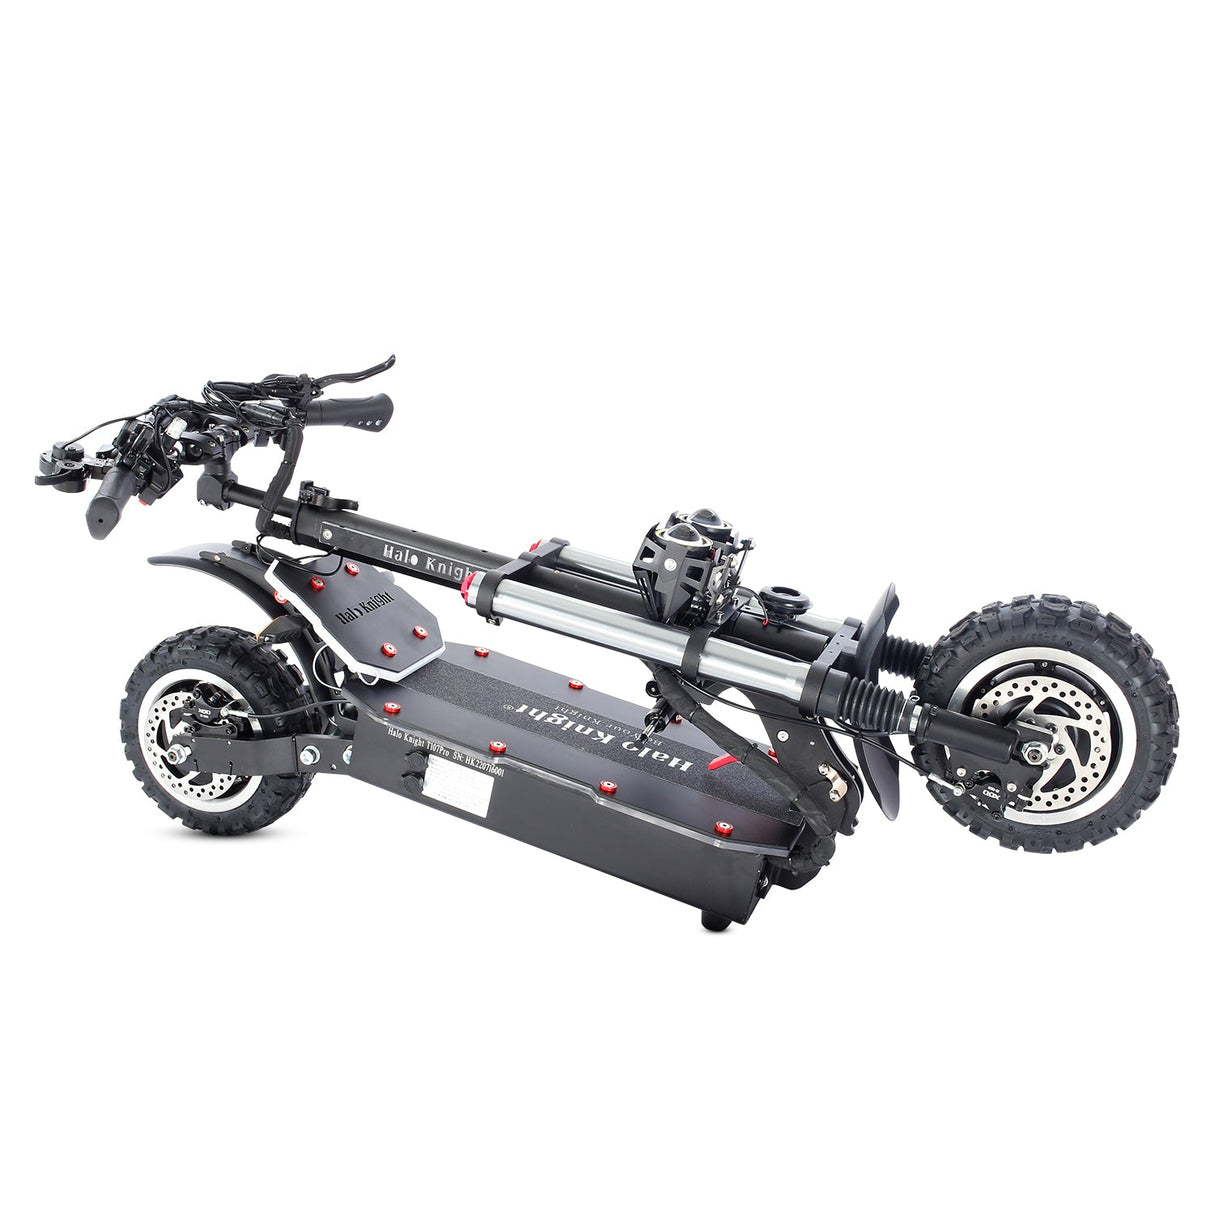 Halo Knight T107 Pro 11" Foldable Electric Scooter 3000 W*2 Dual Motor 60V 38.4 Ah Battery